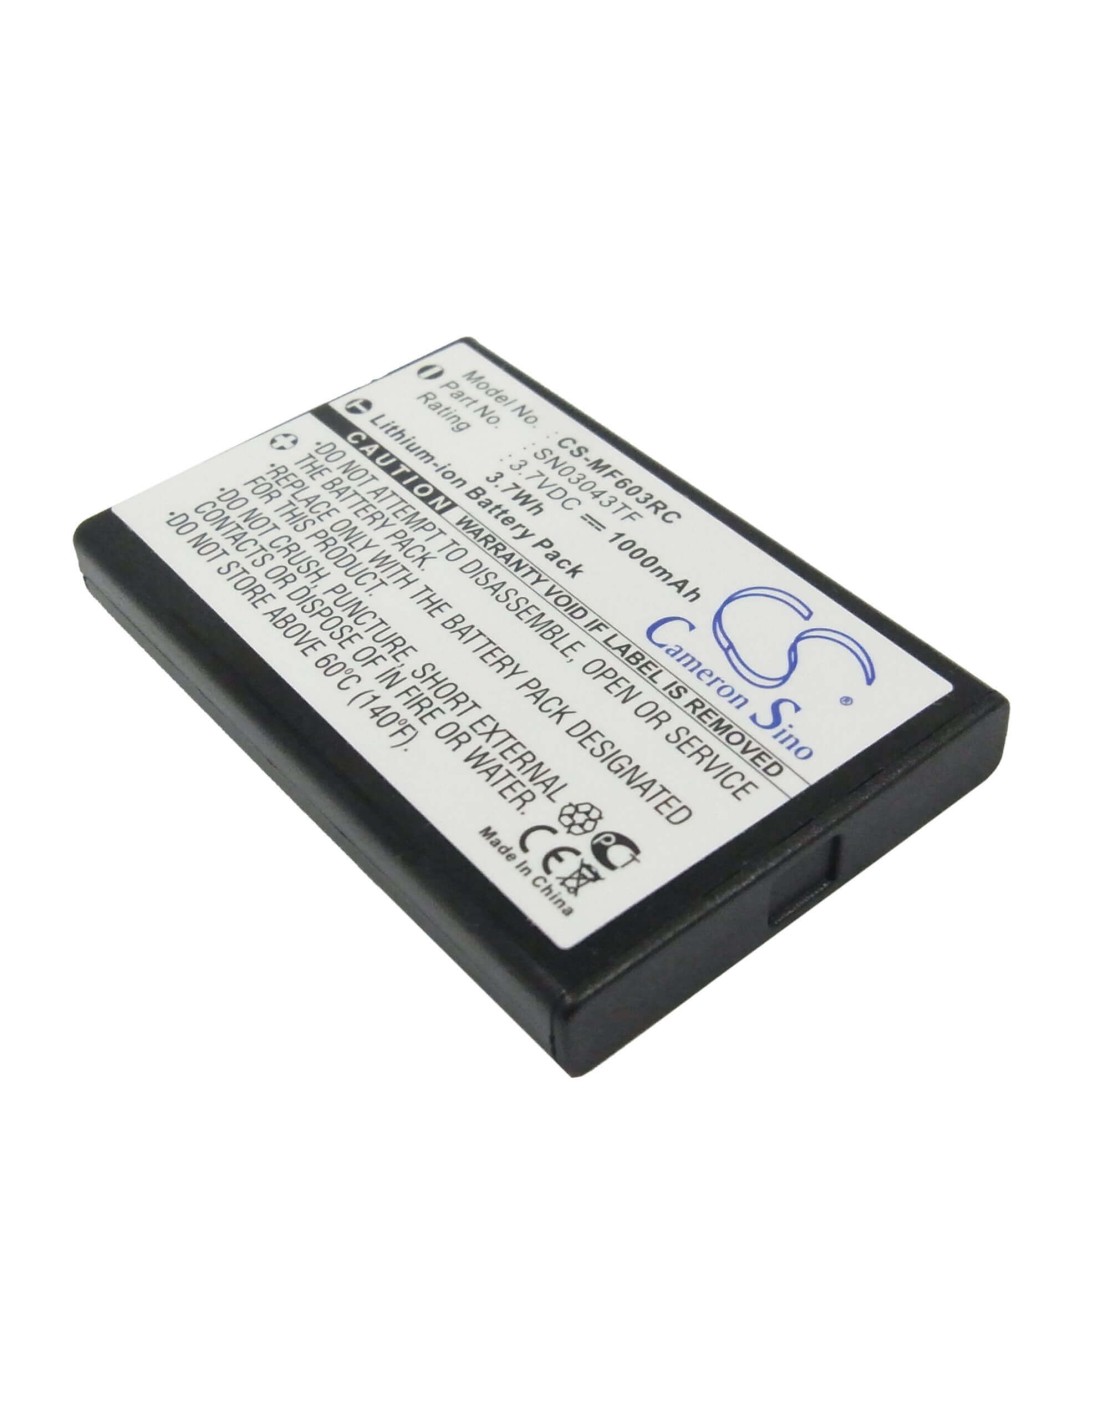 Battery for Acoustic Research Arrx18g 3.7V, 1000mAh - 3.70Wh